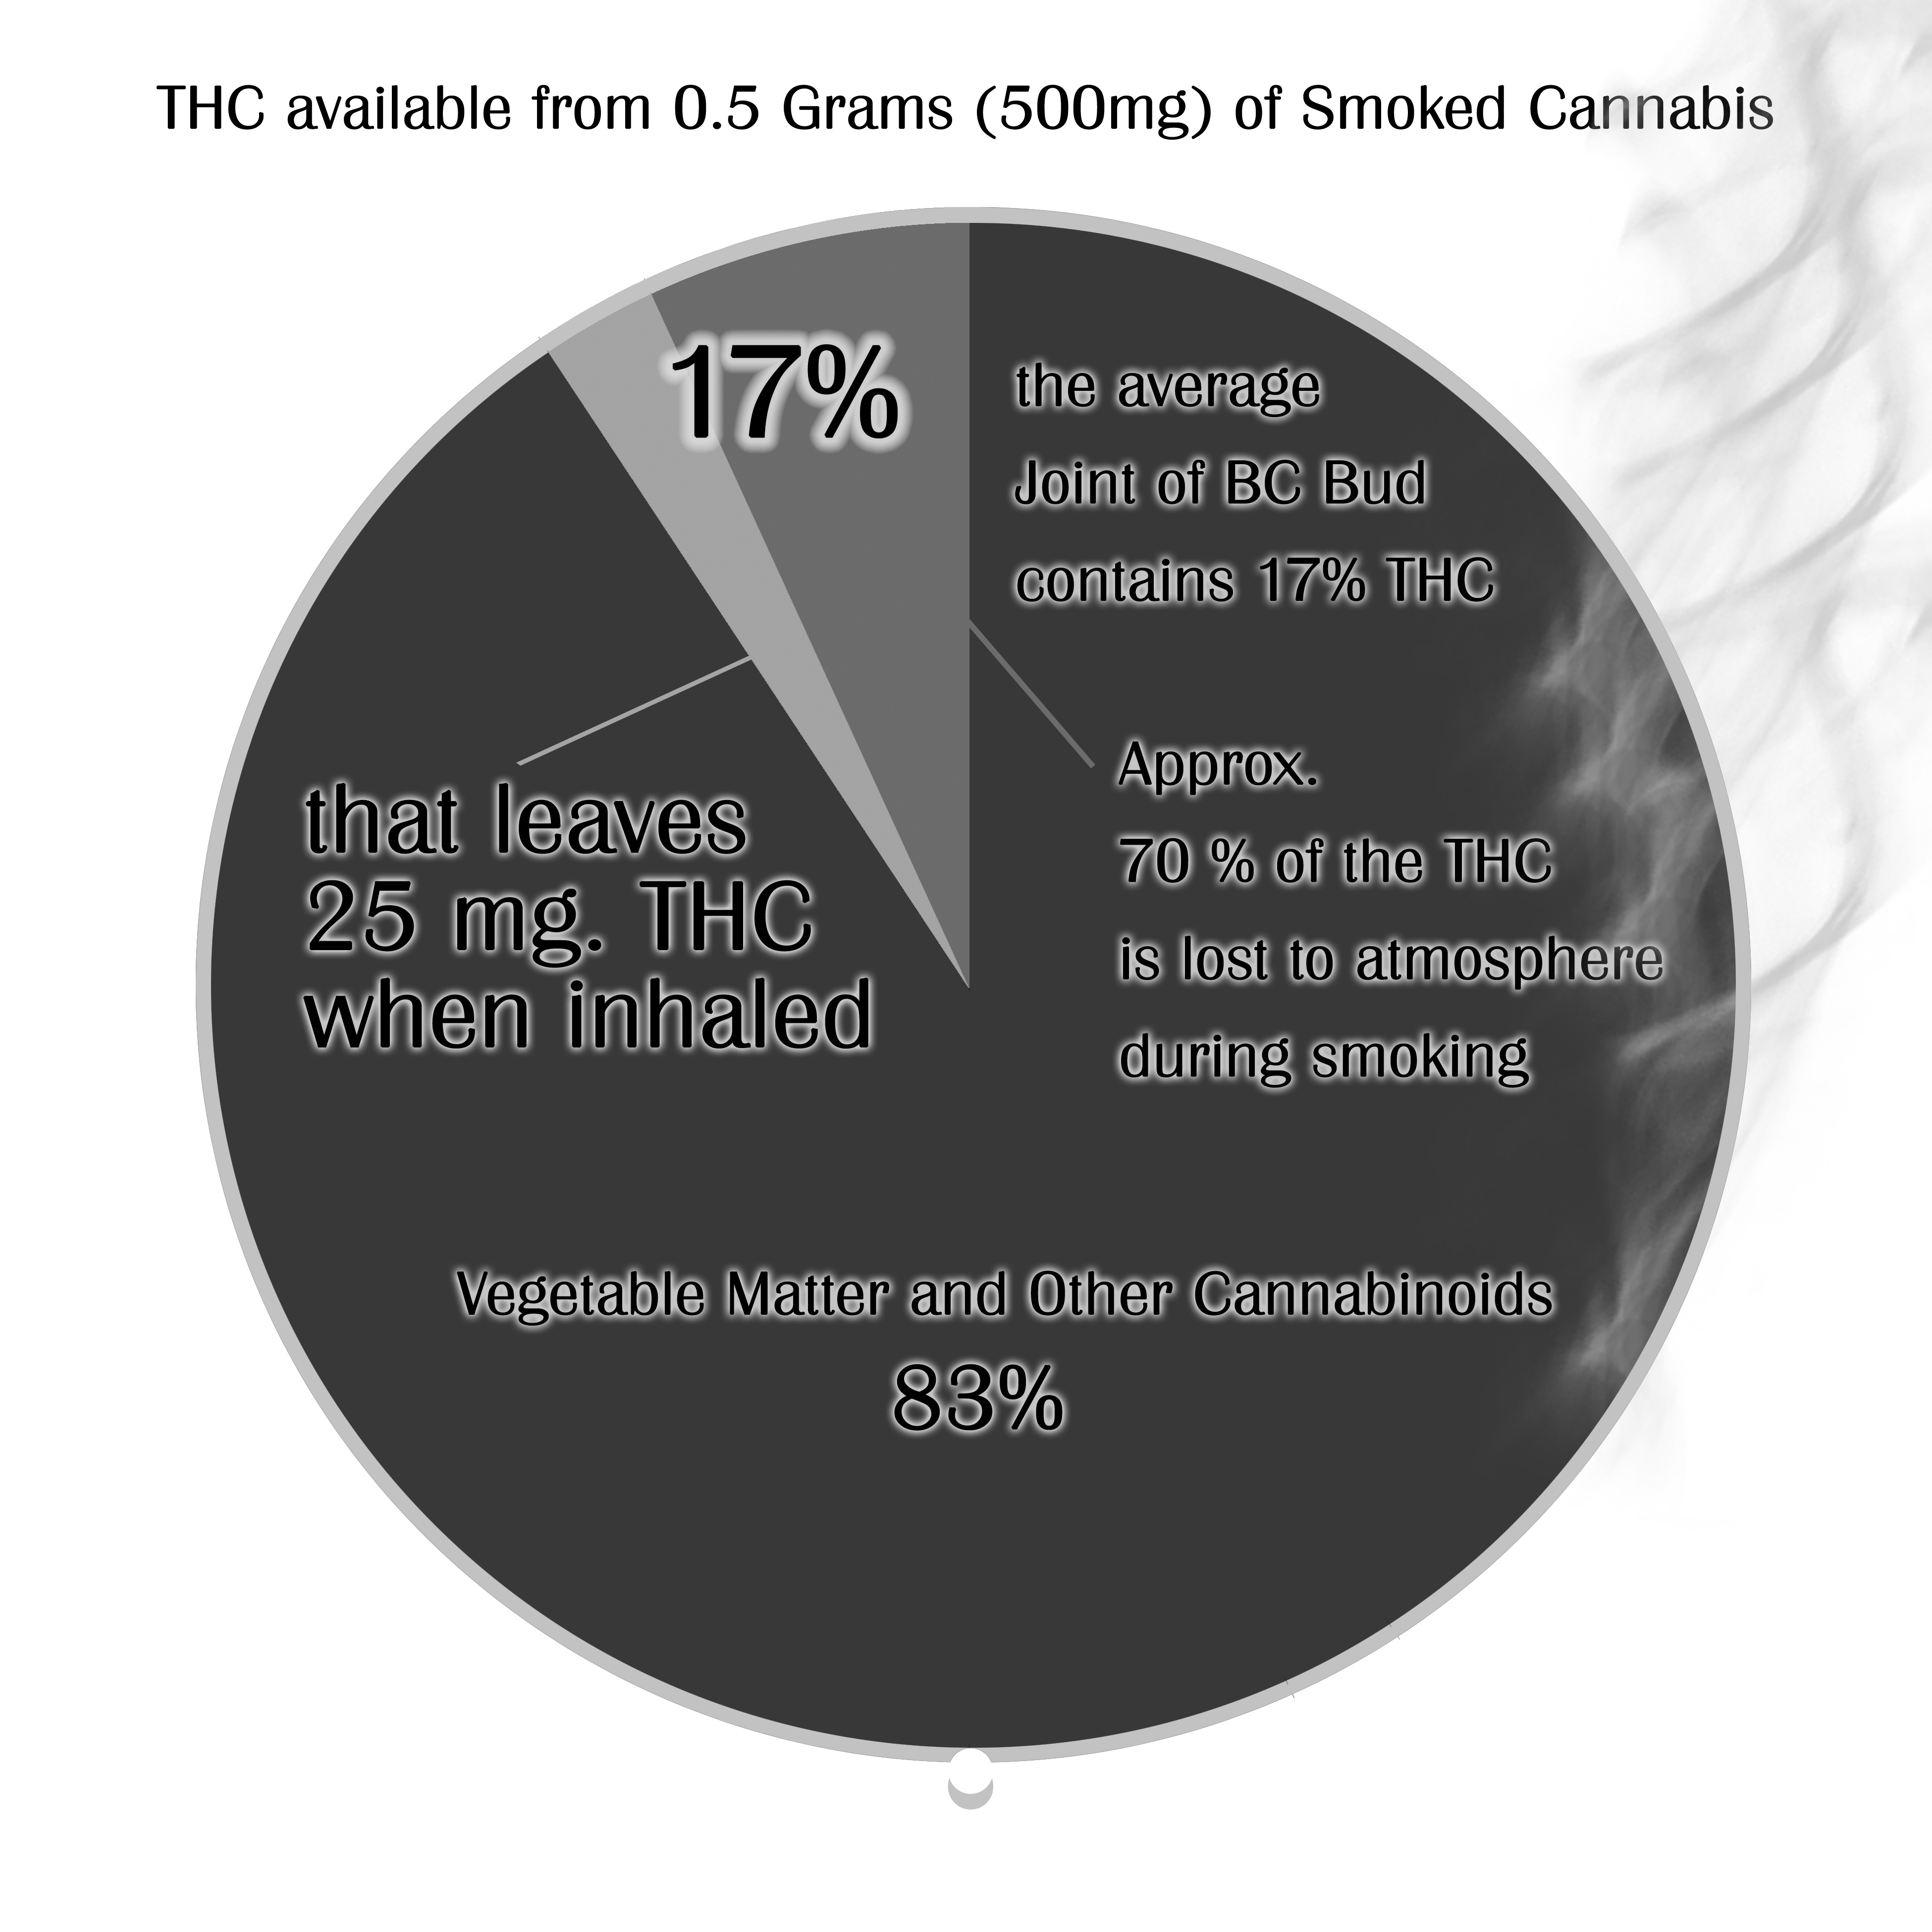 Article With Pie Chart